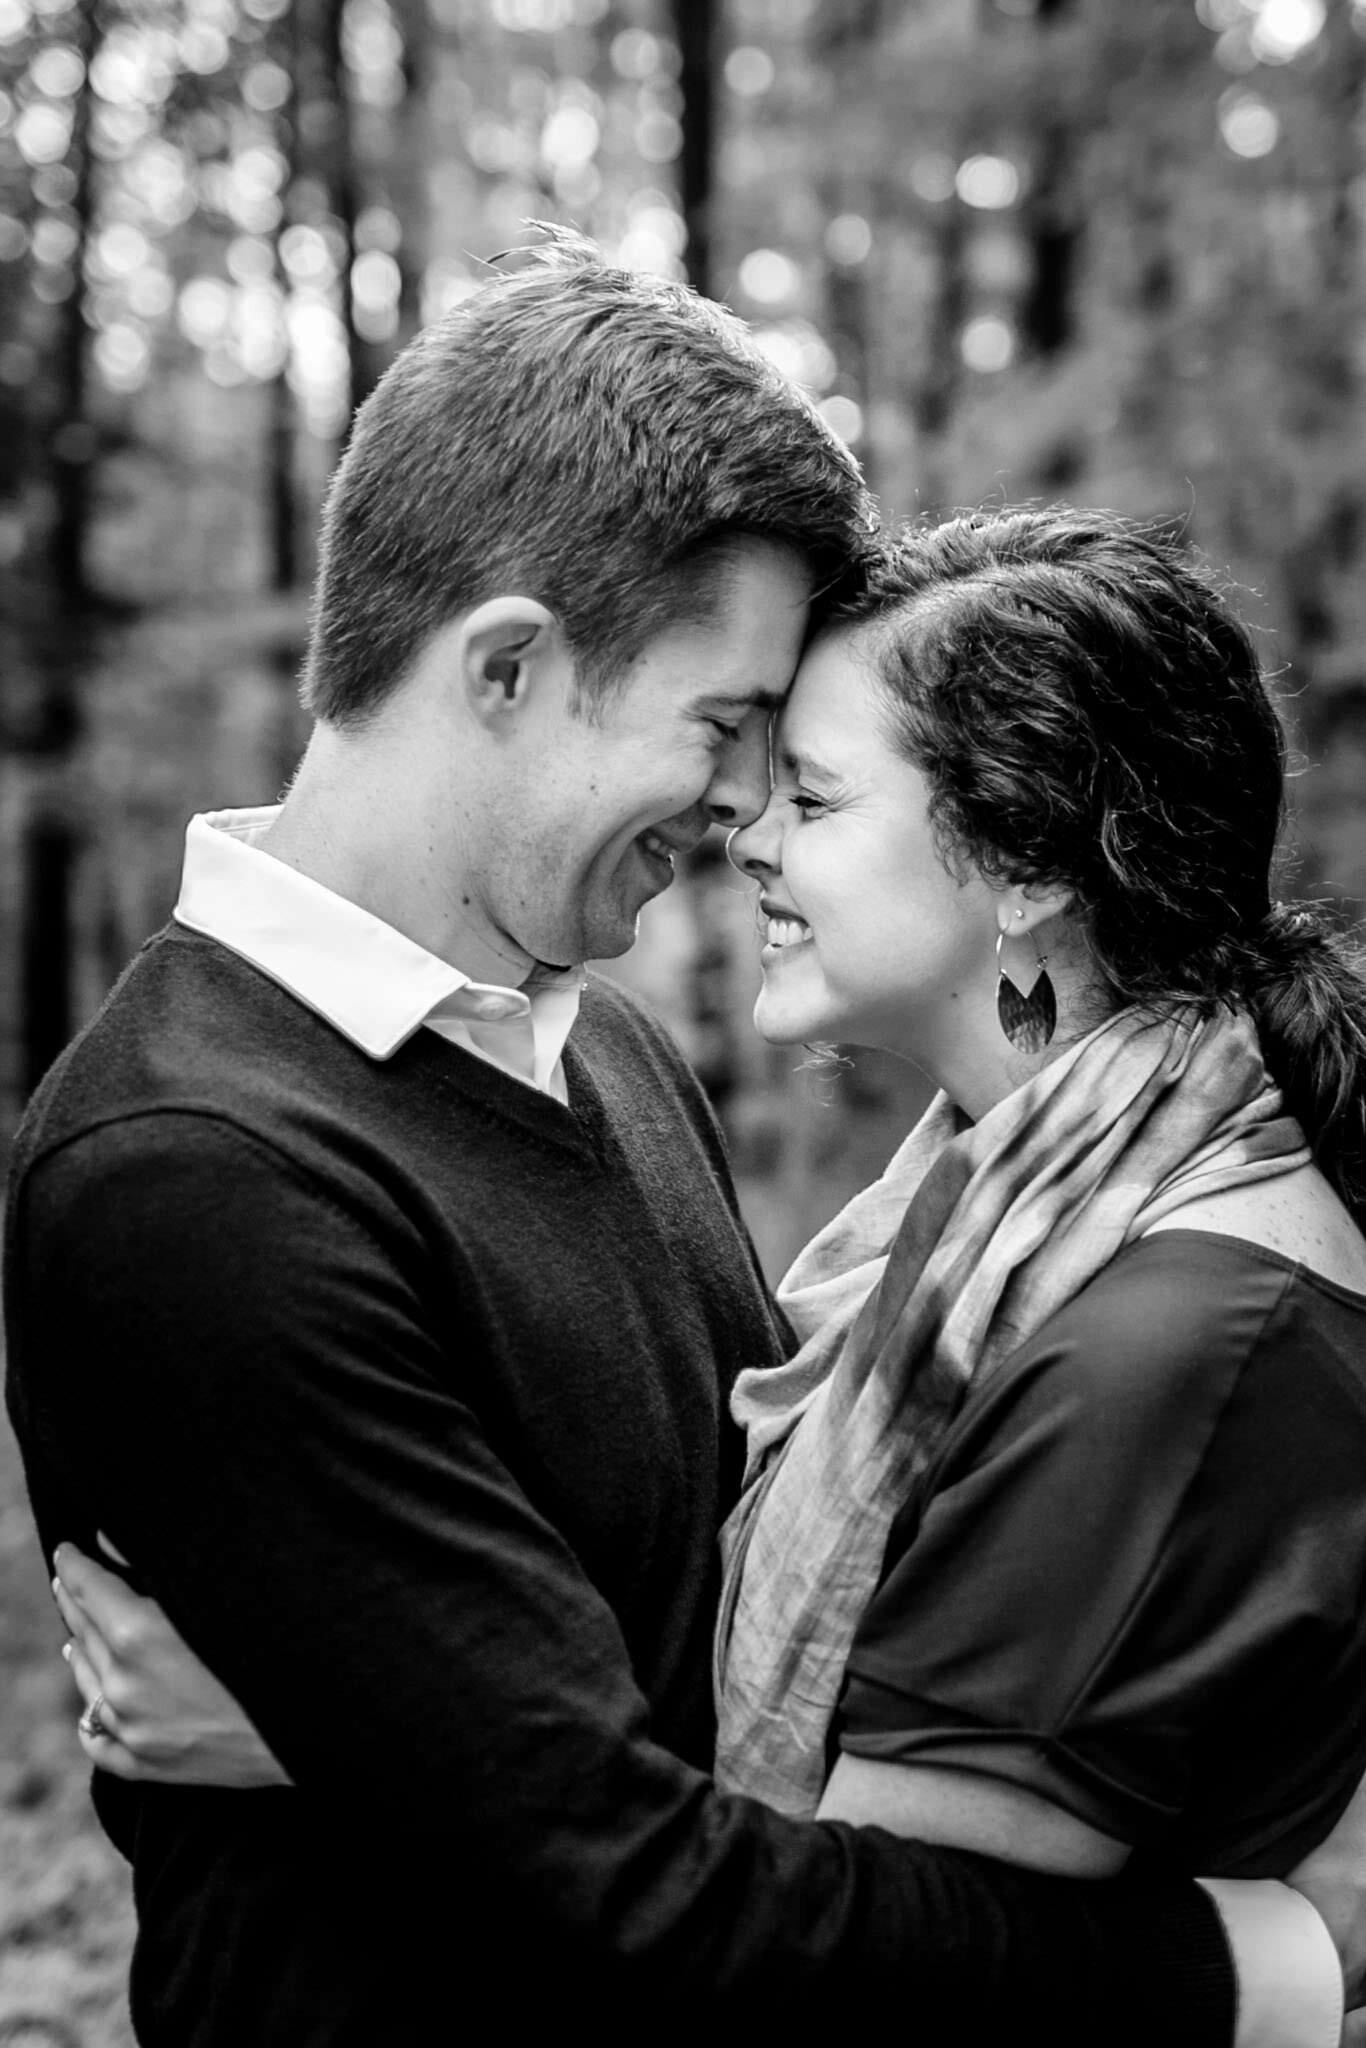 Raleigh Family Photographer | By G. Lin Photography | Umstead Park | Black and white image of husband and wife hugging one another and smiling